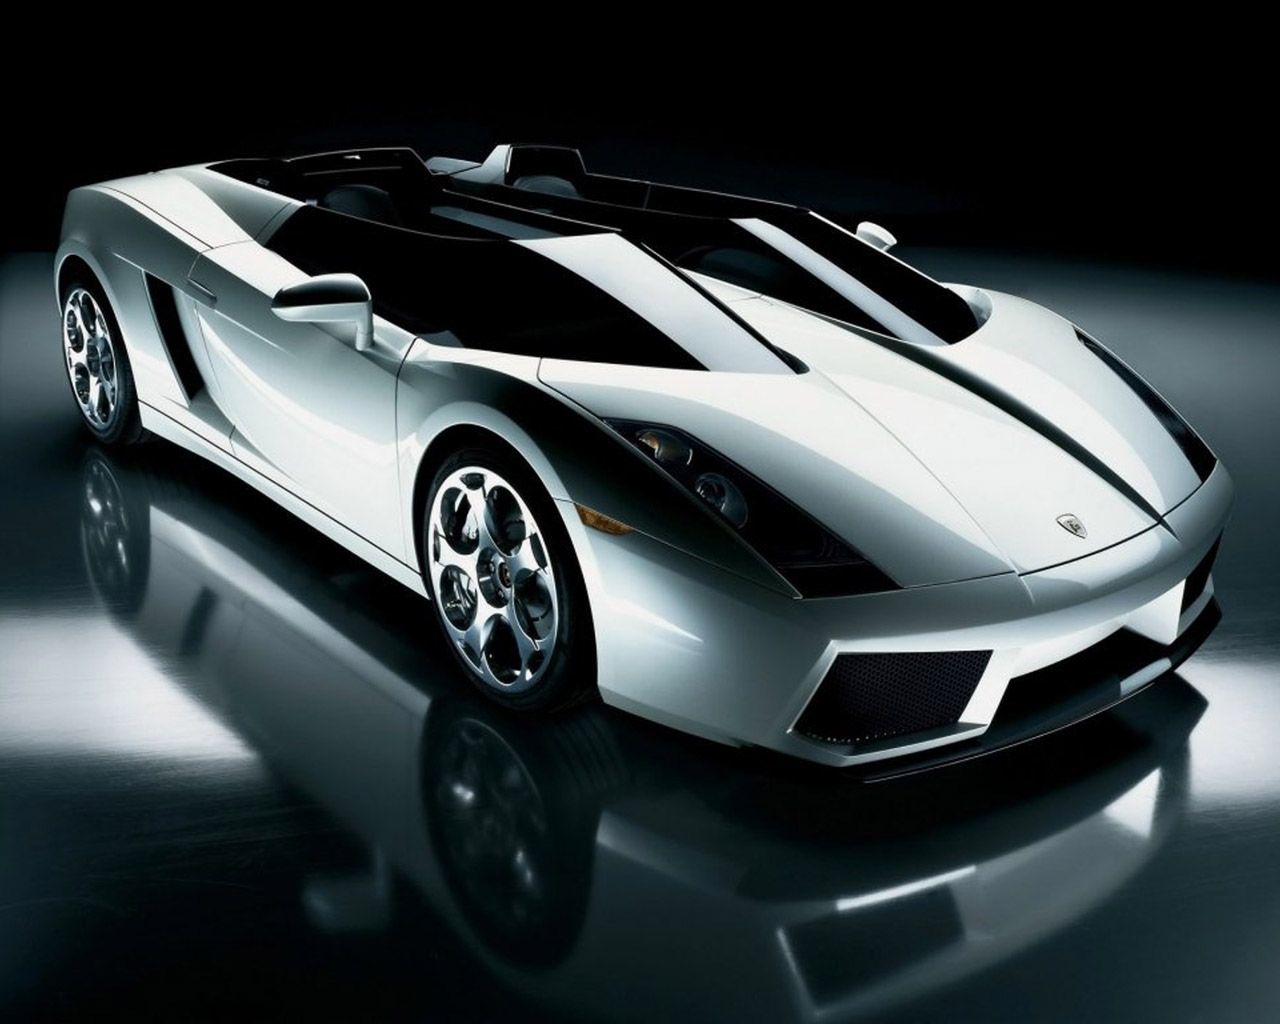 3d-cars-wallpapers1 | wallpapers55.com - Best Wallpapers for PCs ...